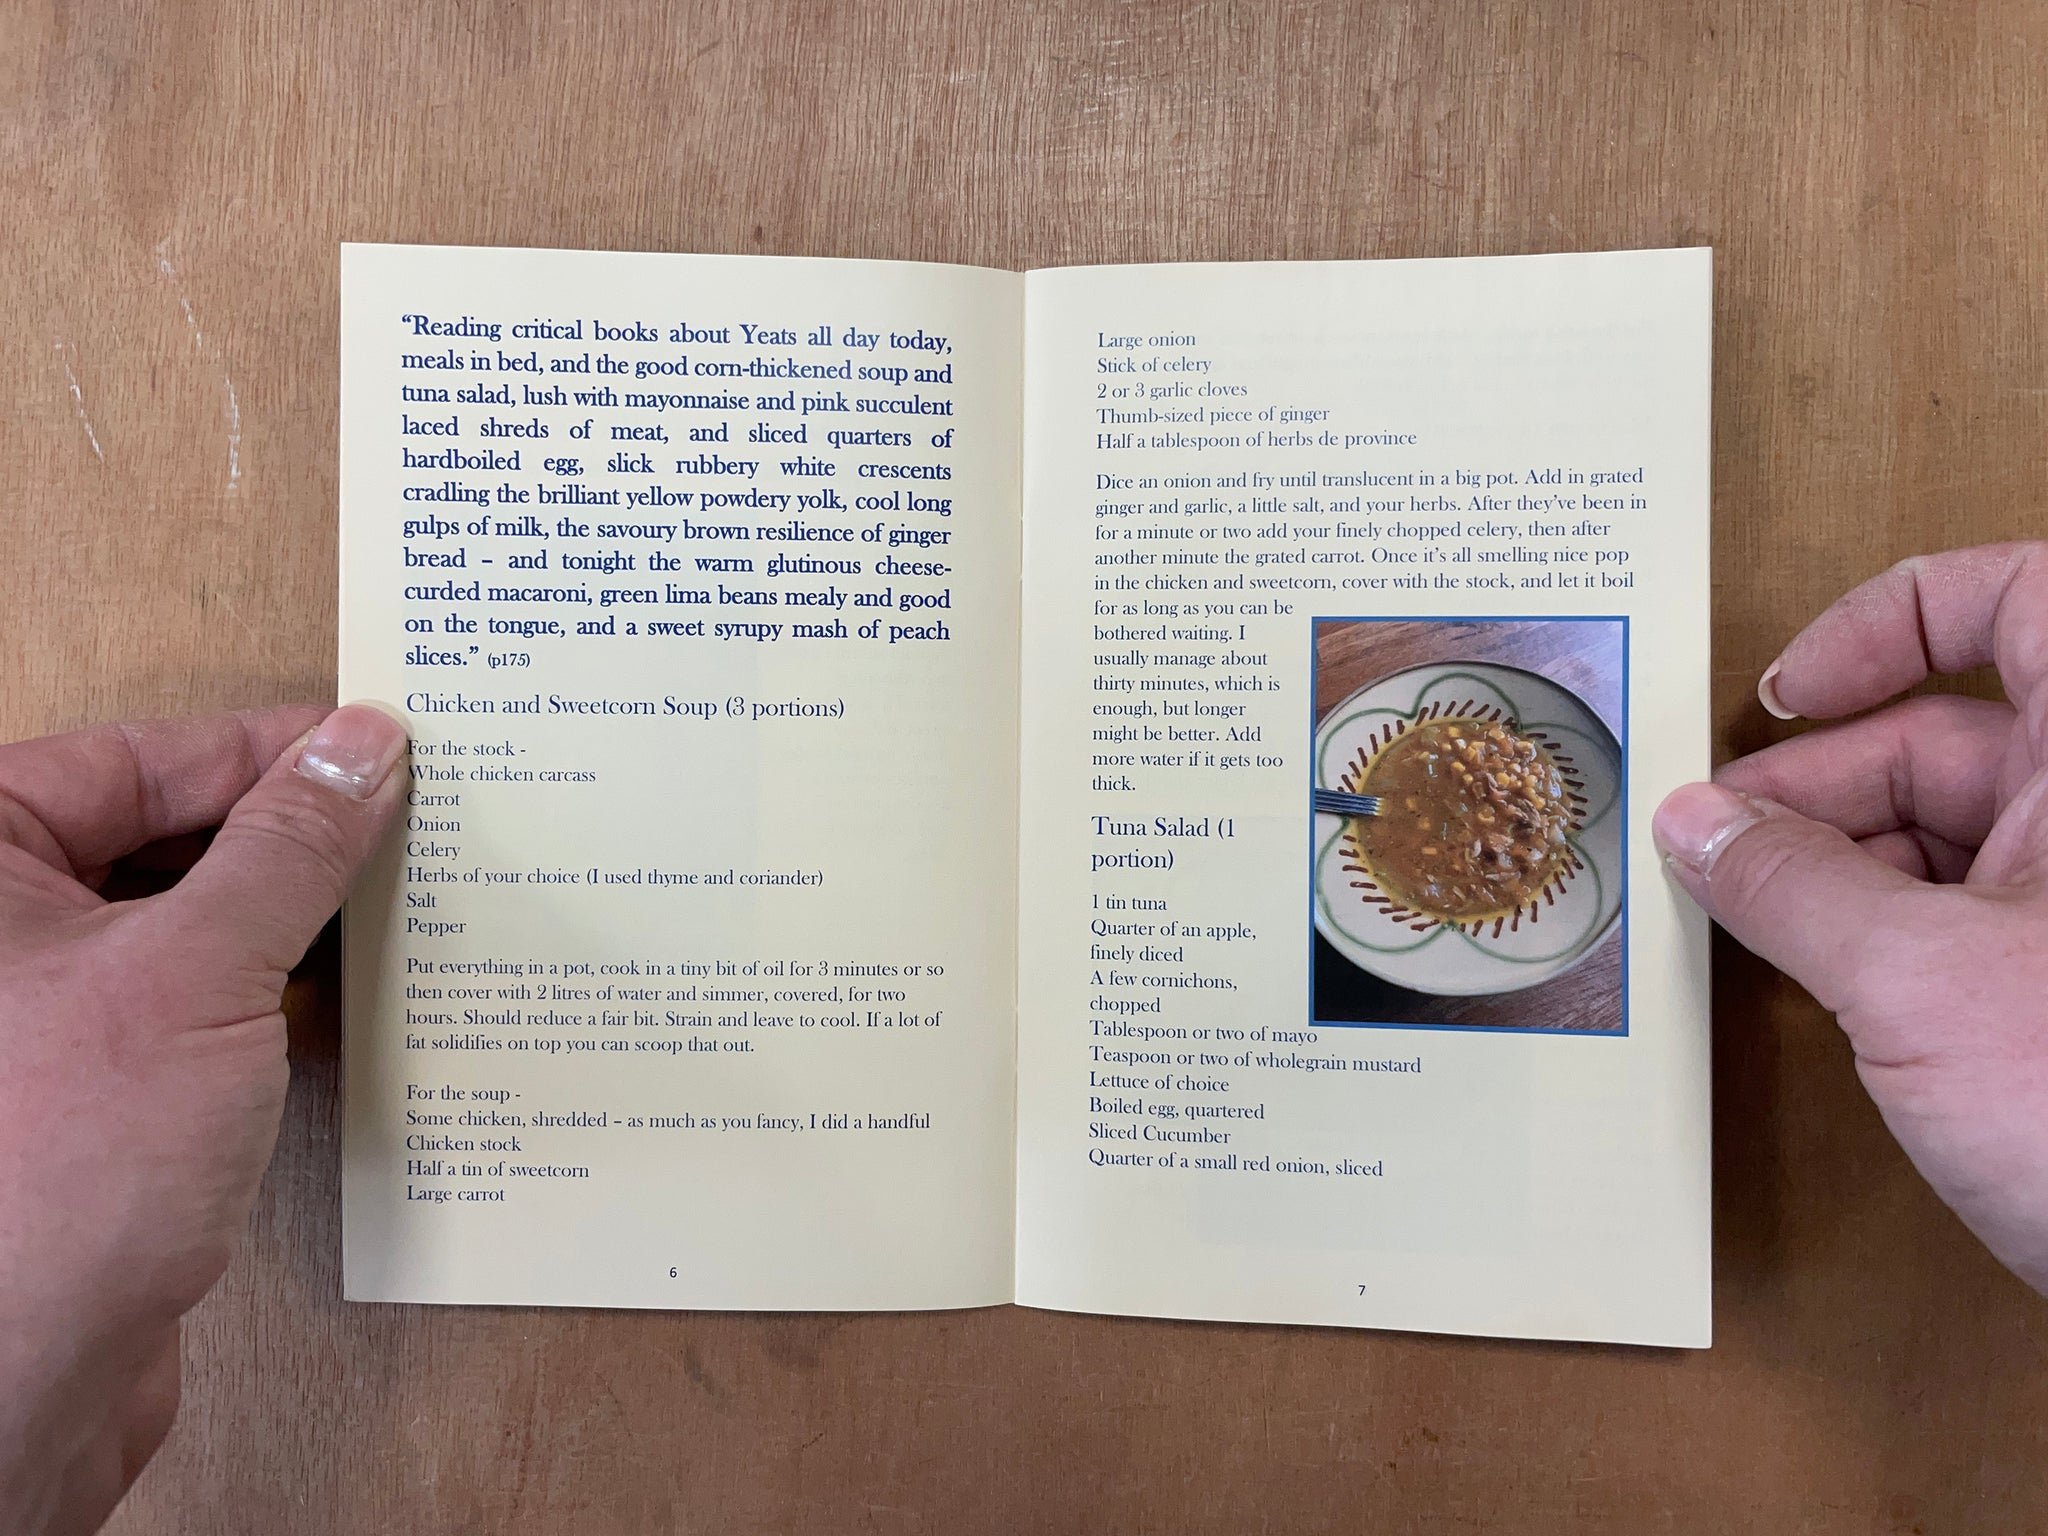 THE SYLVIA PLATH COOKBOOK by Charlie Mitchell